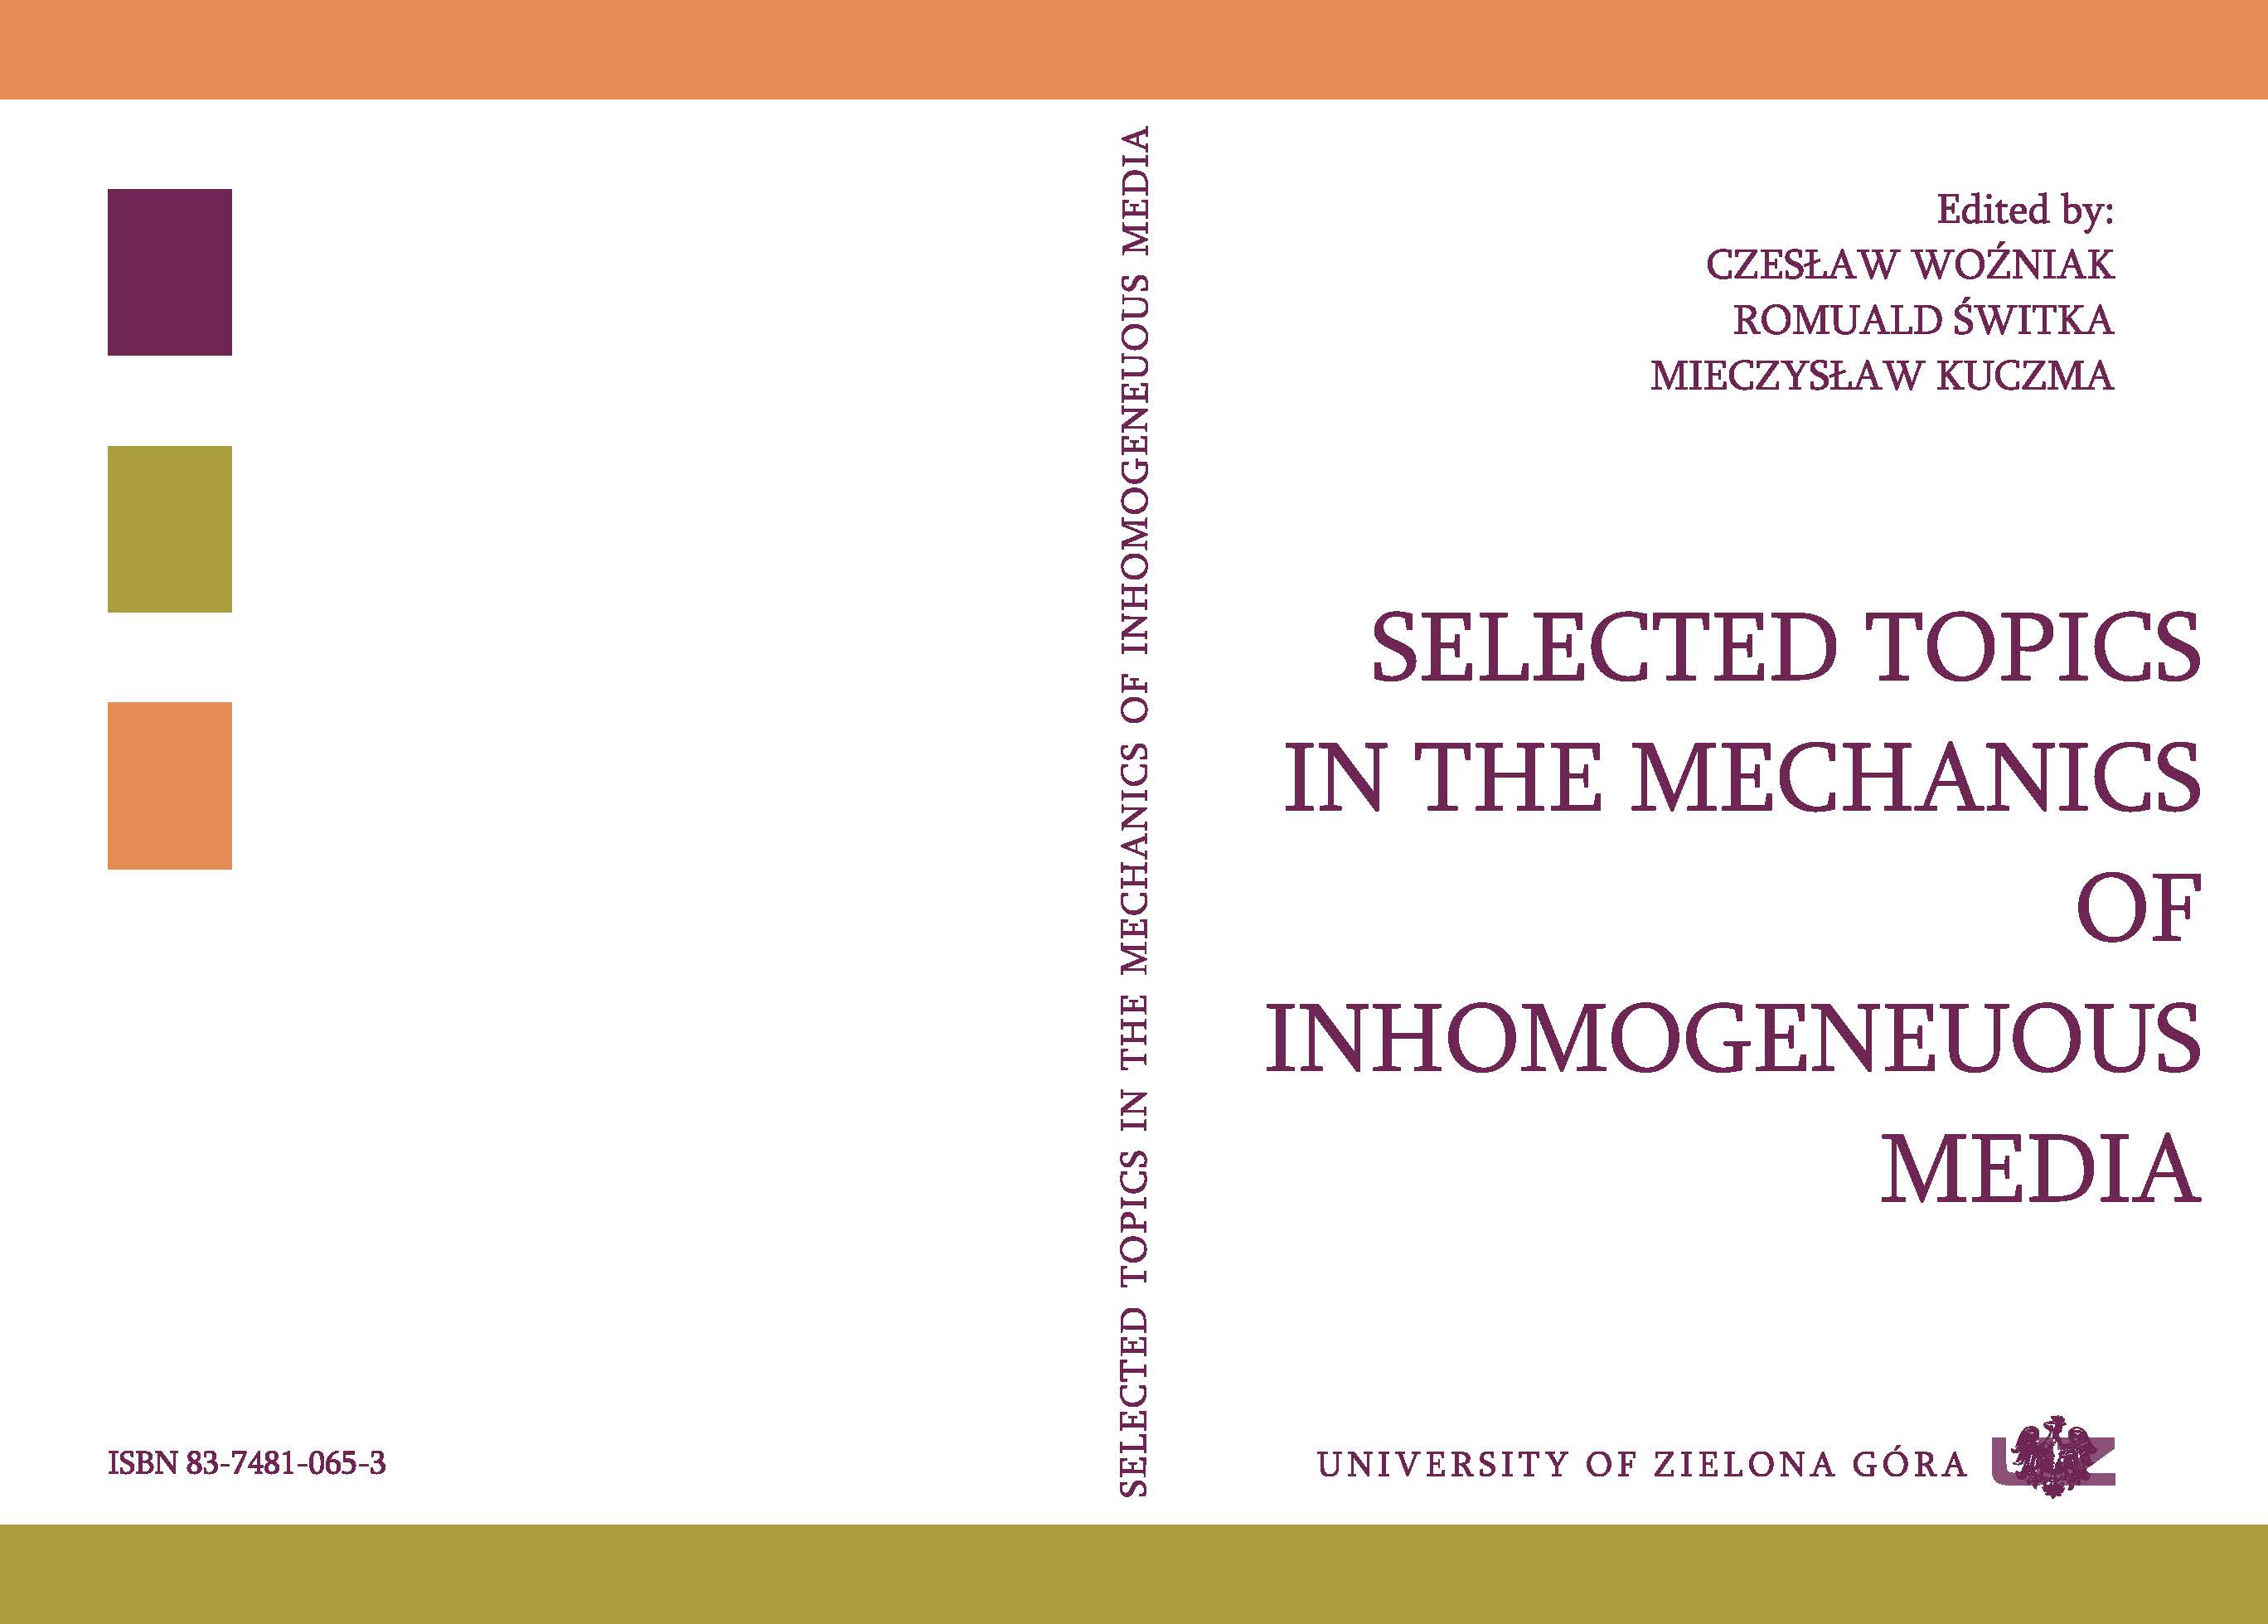 Selected topics in the mechanics of inhomogeneous media_T-page.jpg